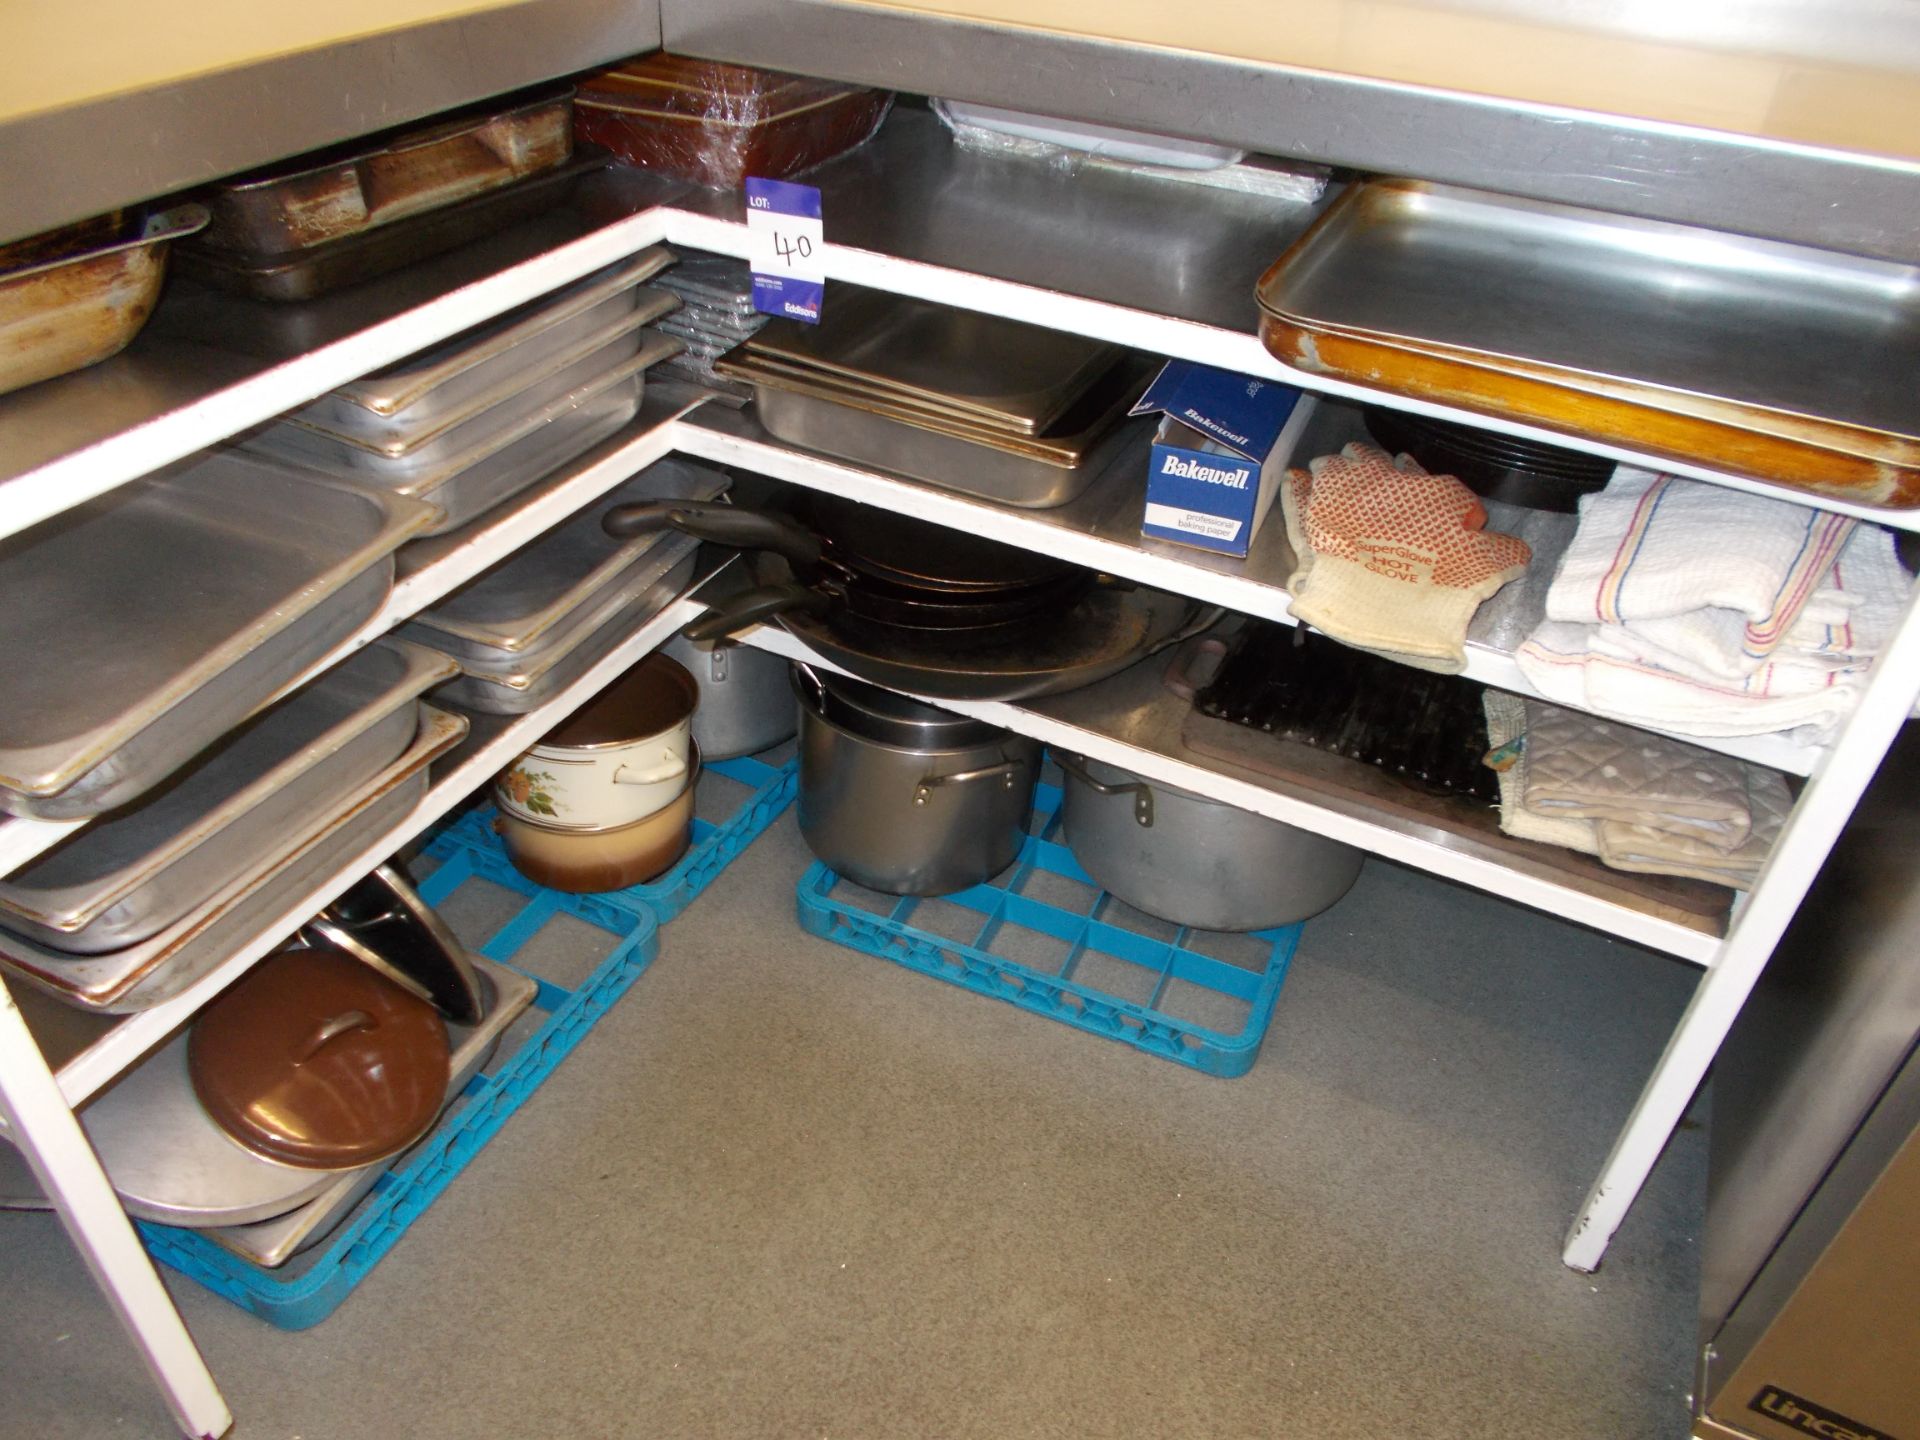 Large quantity of cutlery, trays etc to kitchen area (Shelving not included)